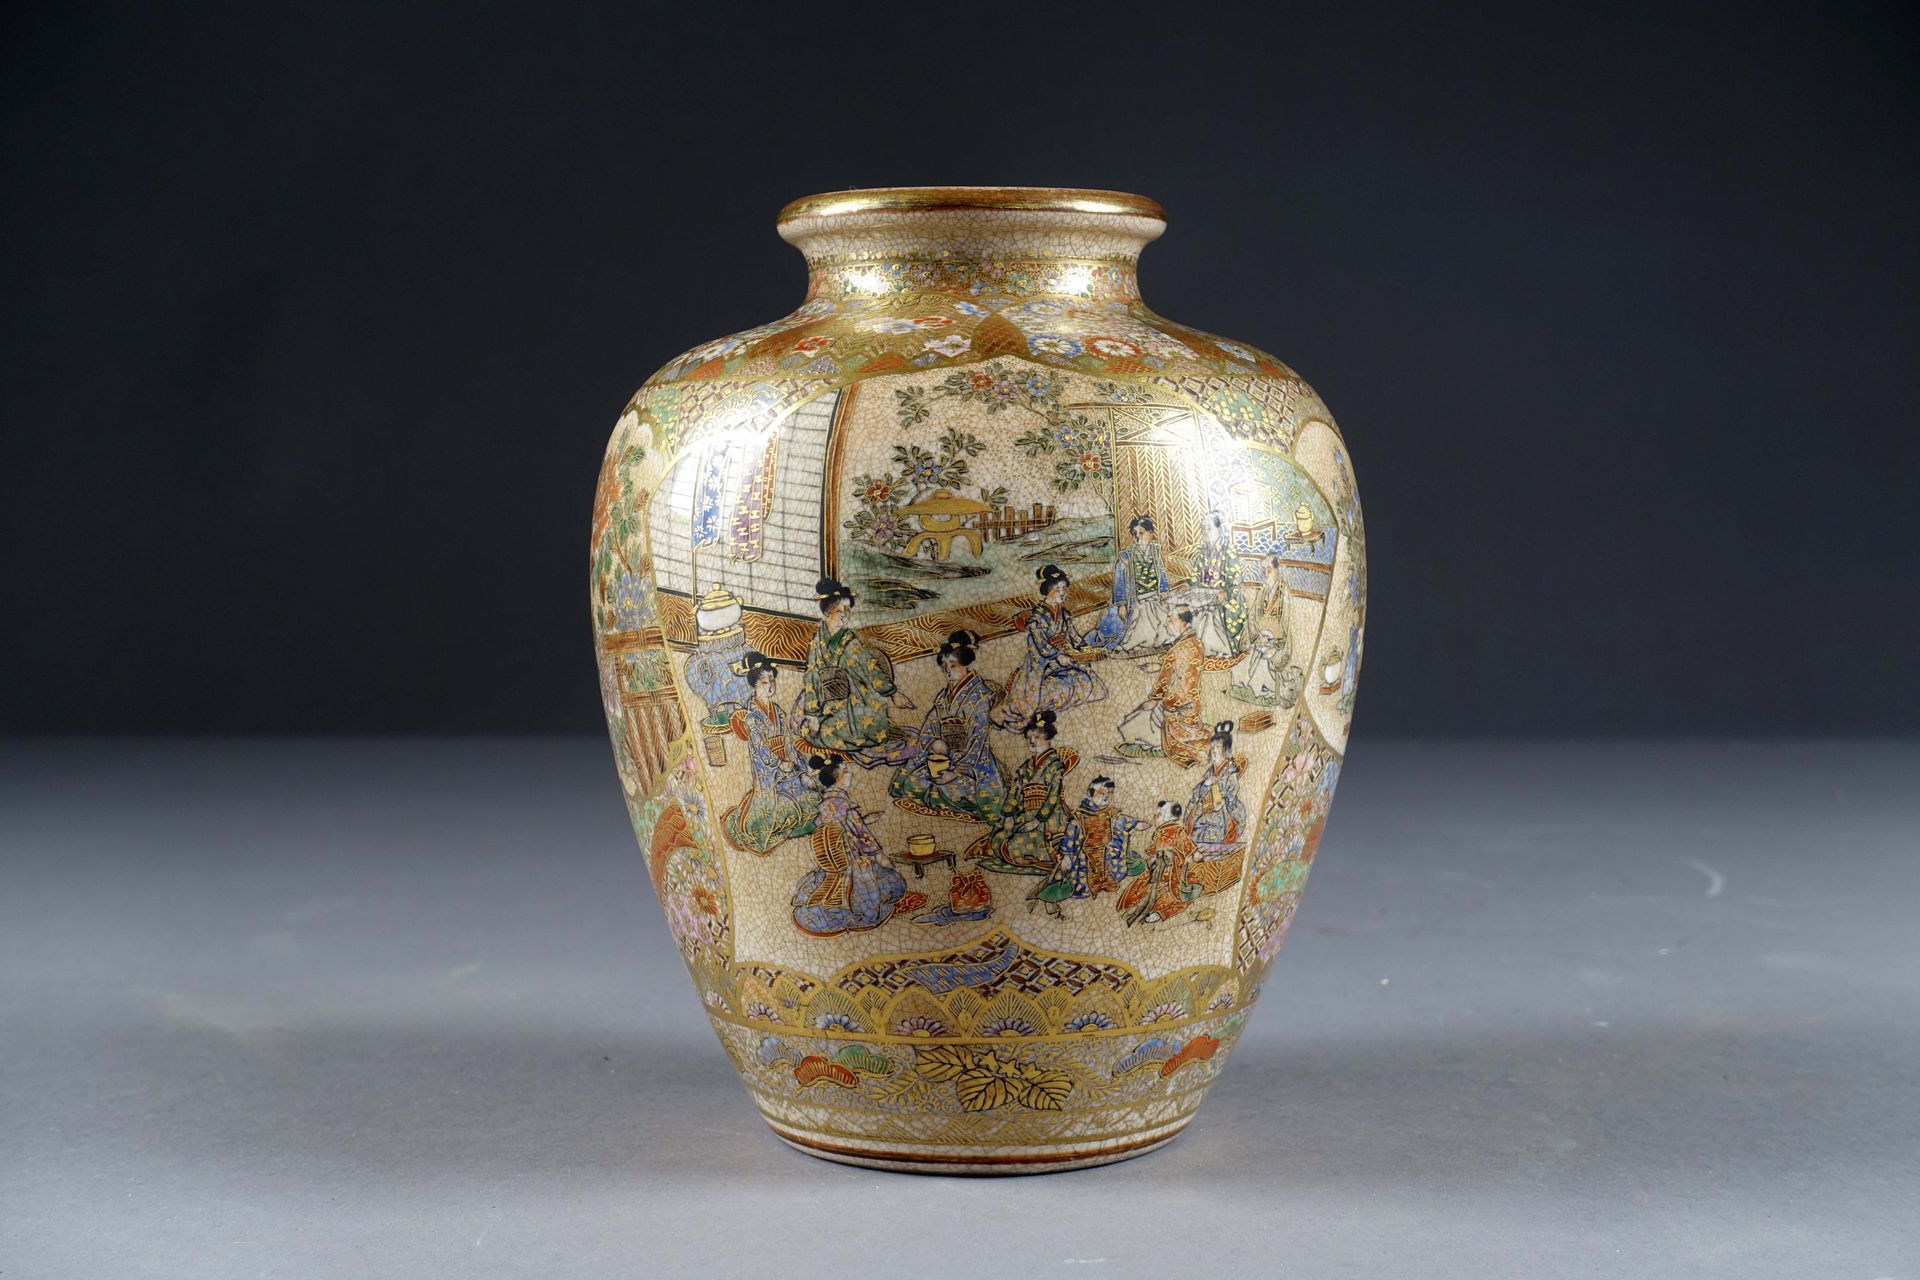 Satsuma. A fine stoneware vase meticulously decorated with gold and polychrome v&hellip;